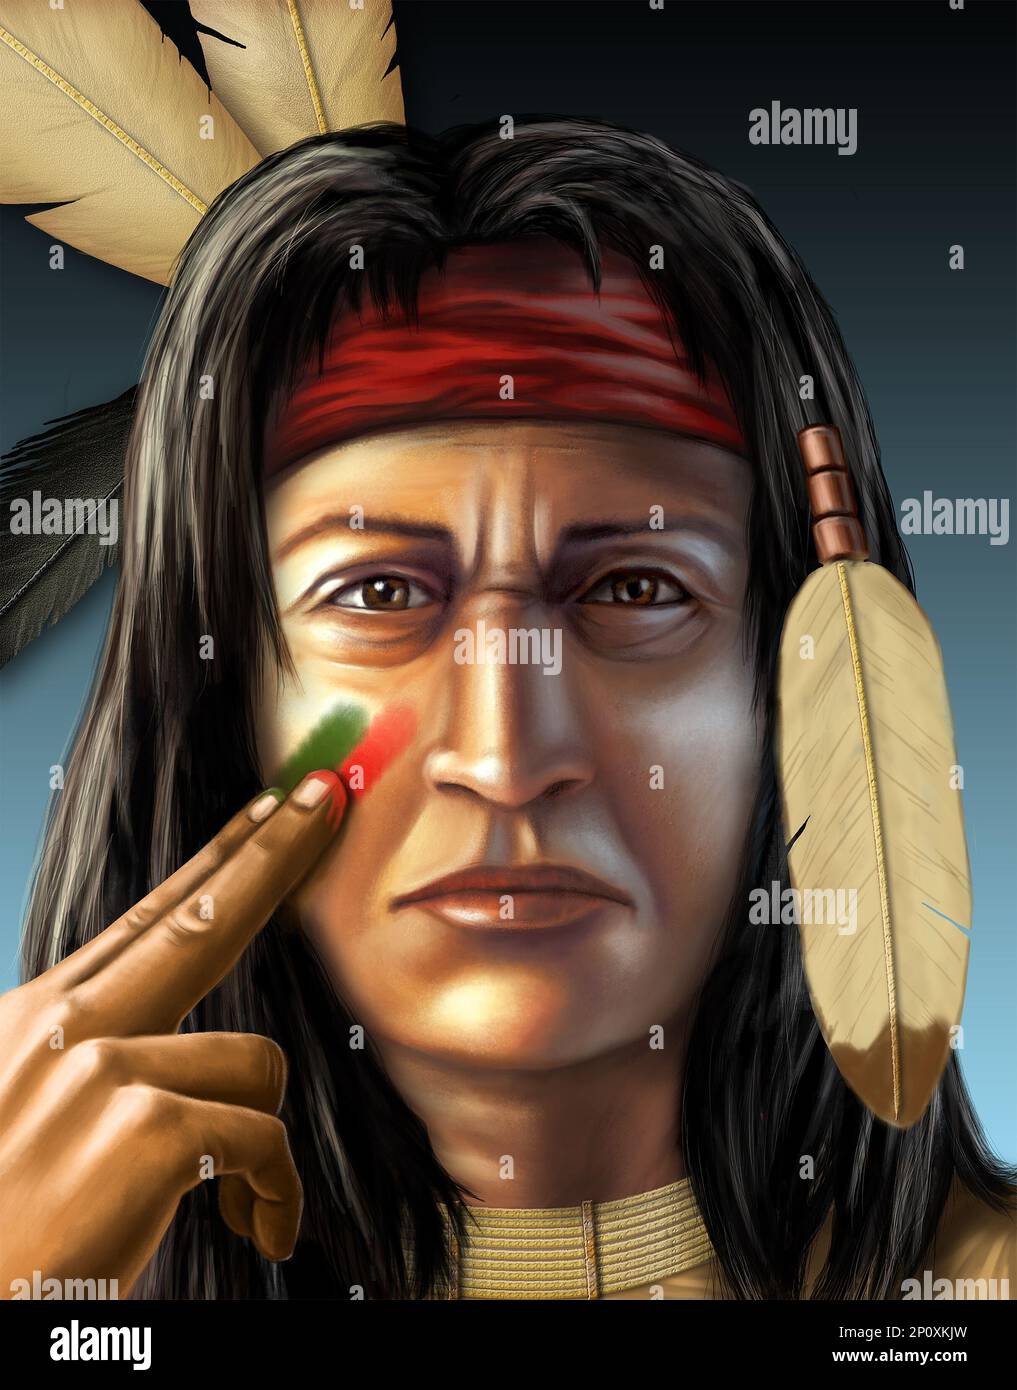 American indian warrior painting his face. Digital illustration, figure created from scratch, no model release necessary. Stock Photo